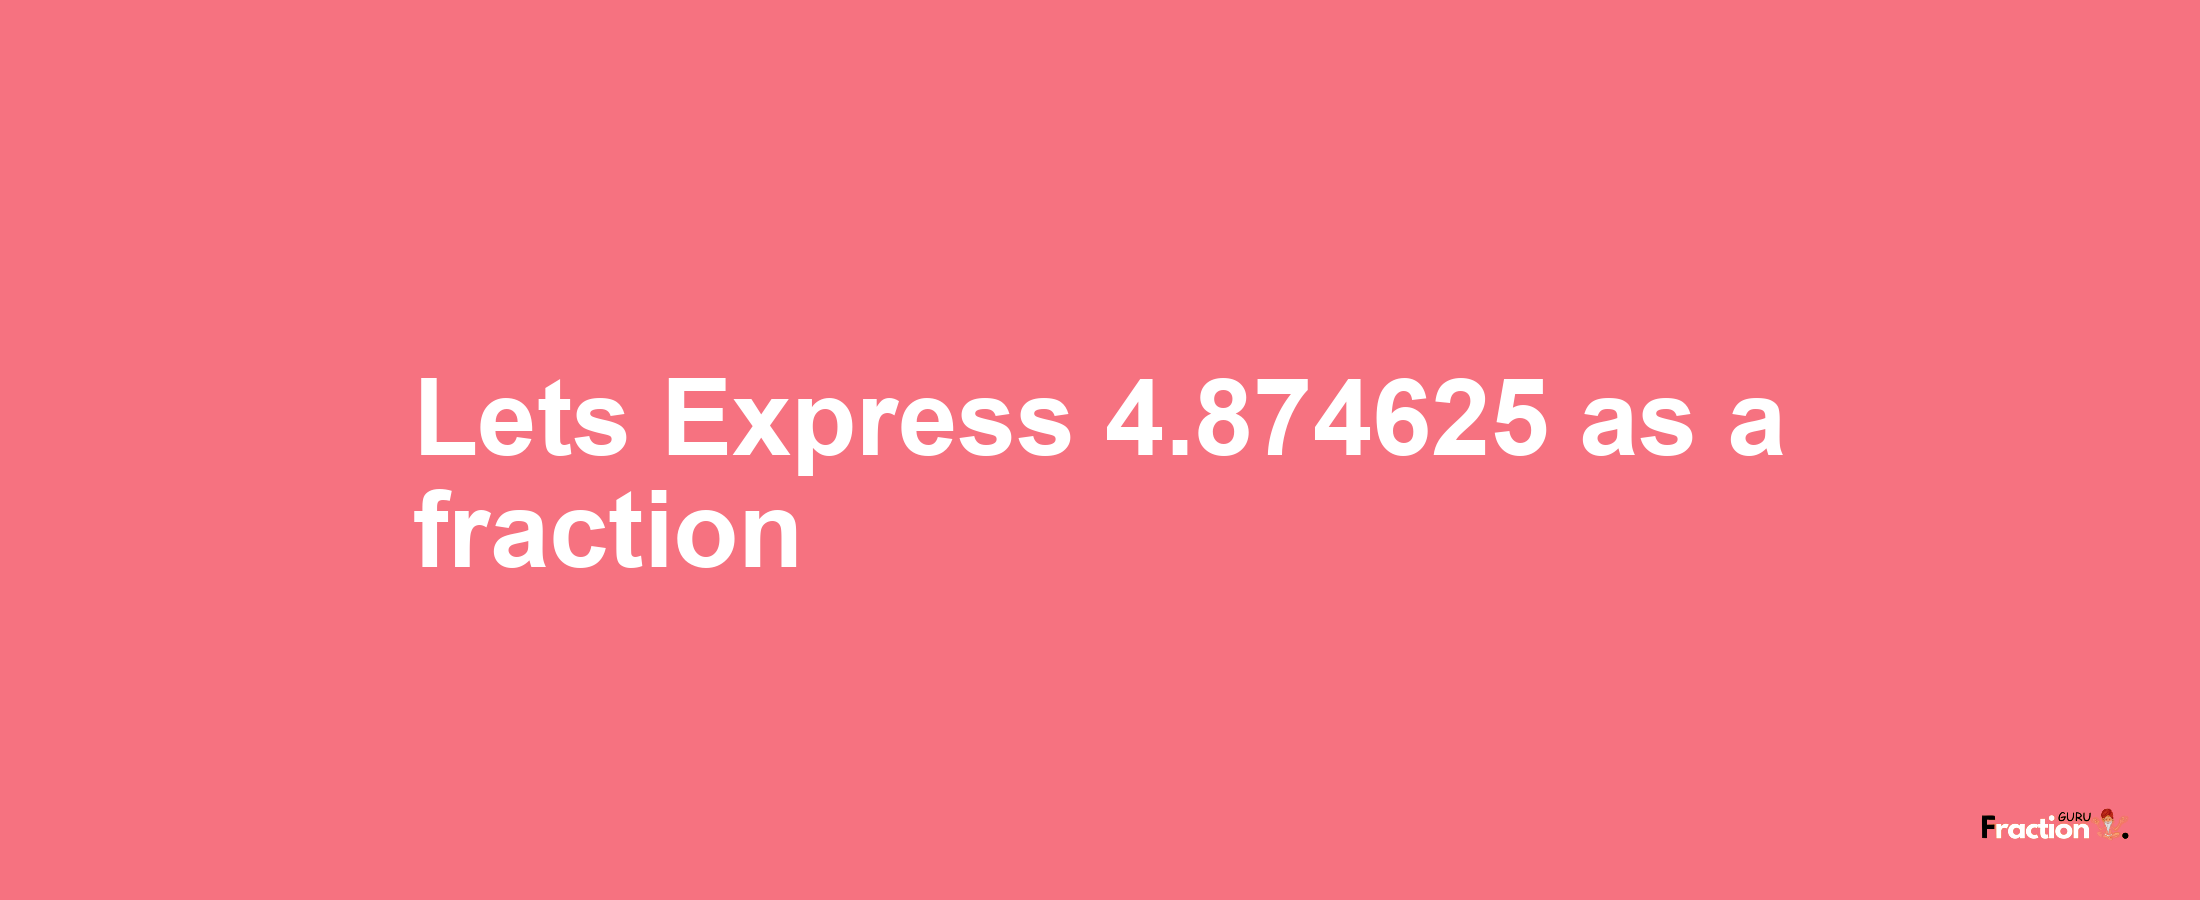 Lets Express 4.874625 as afraction